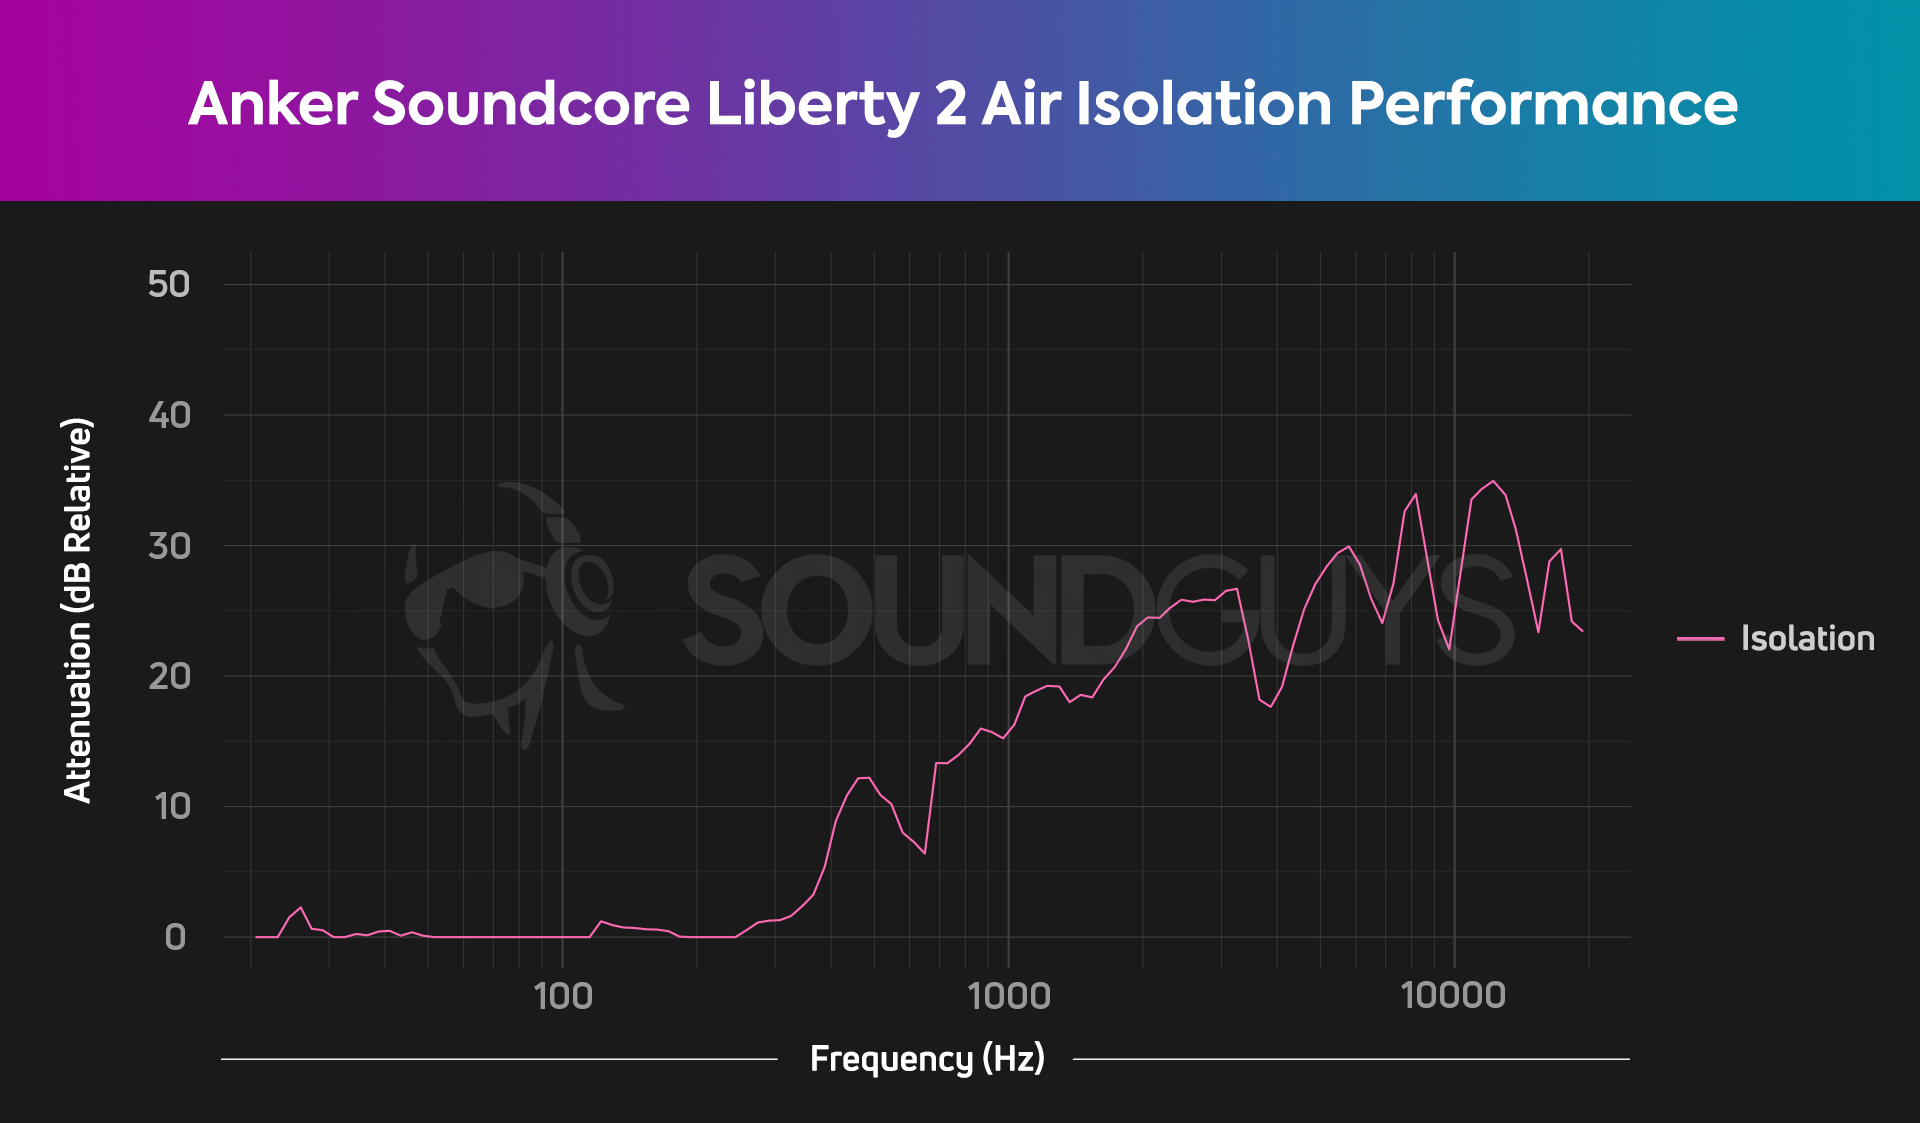 A chart depicts the Anker Soundcore Liberty Air 2 isolation performance, revealing it doesn't affect sounds below 400Hz much at all.